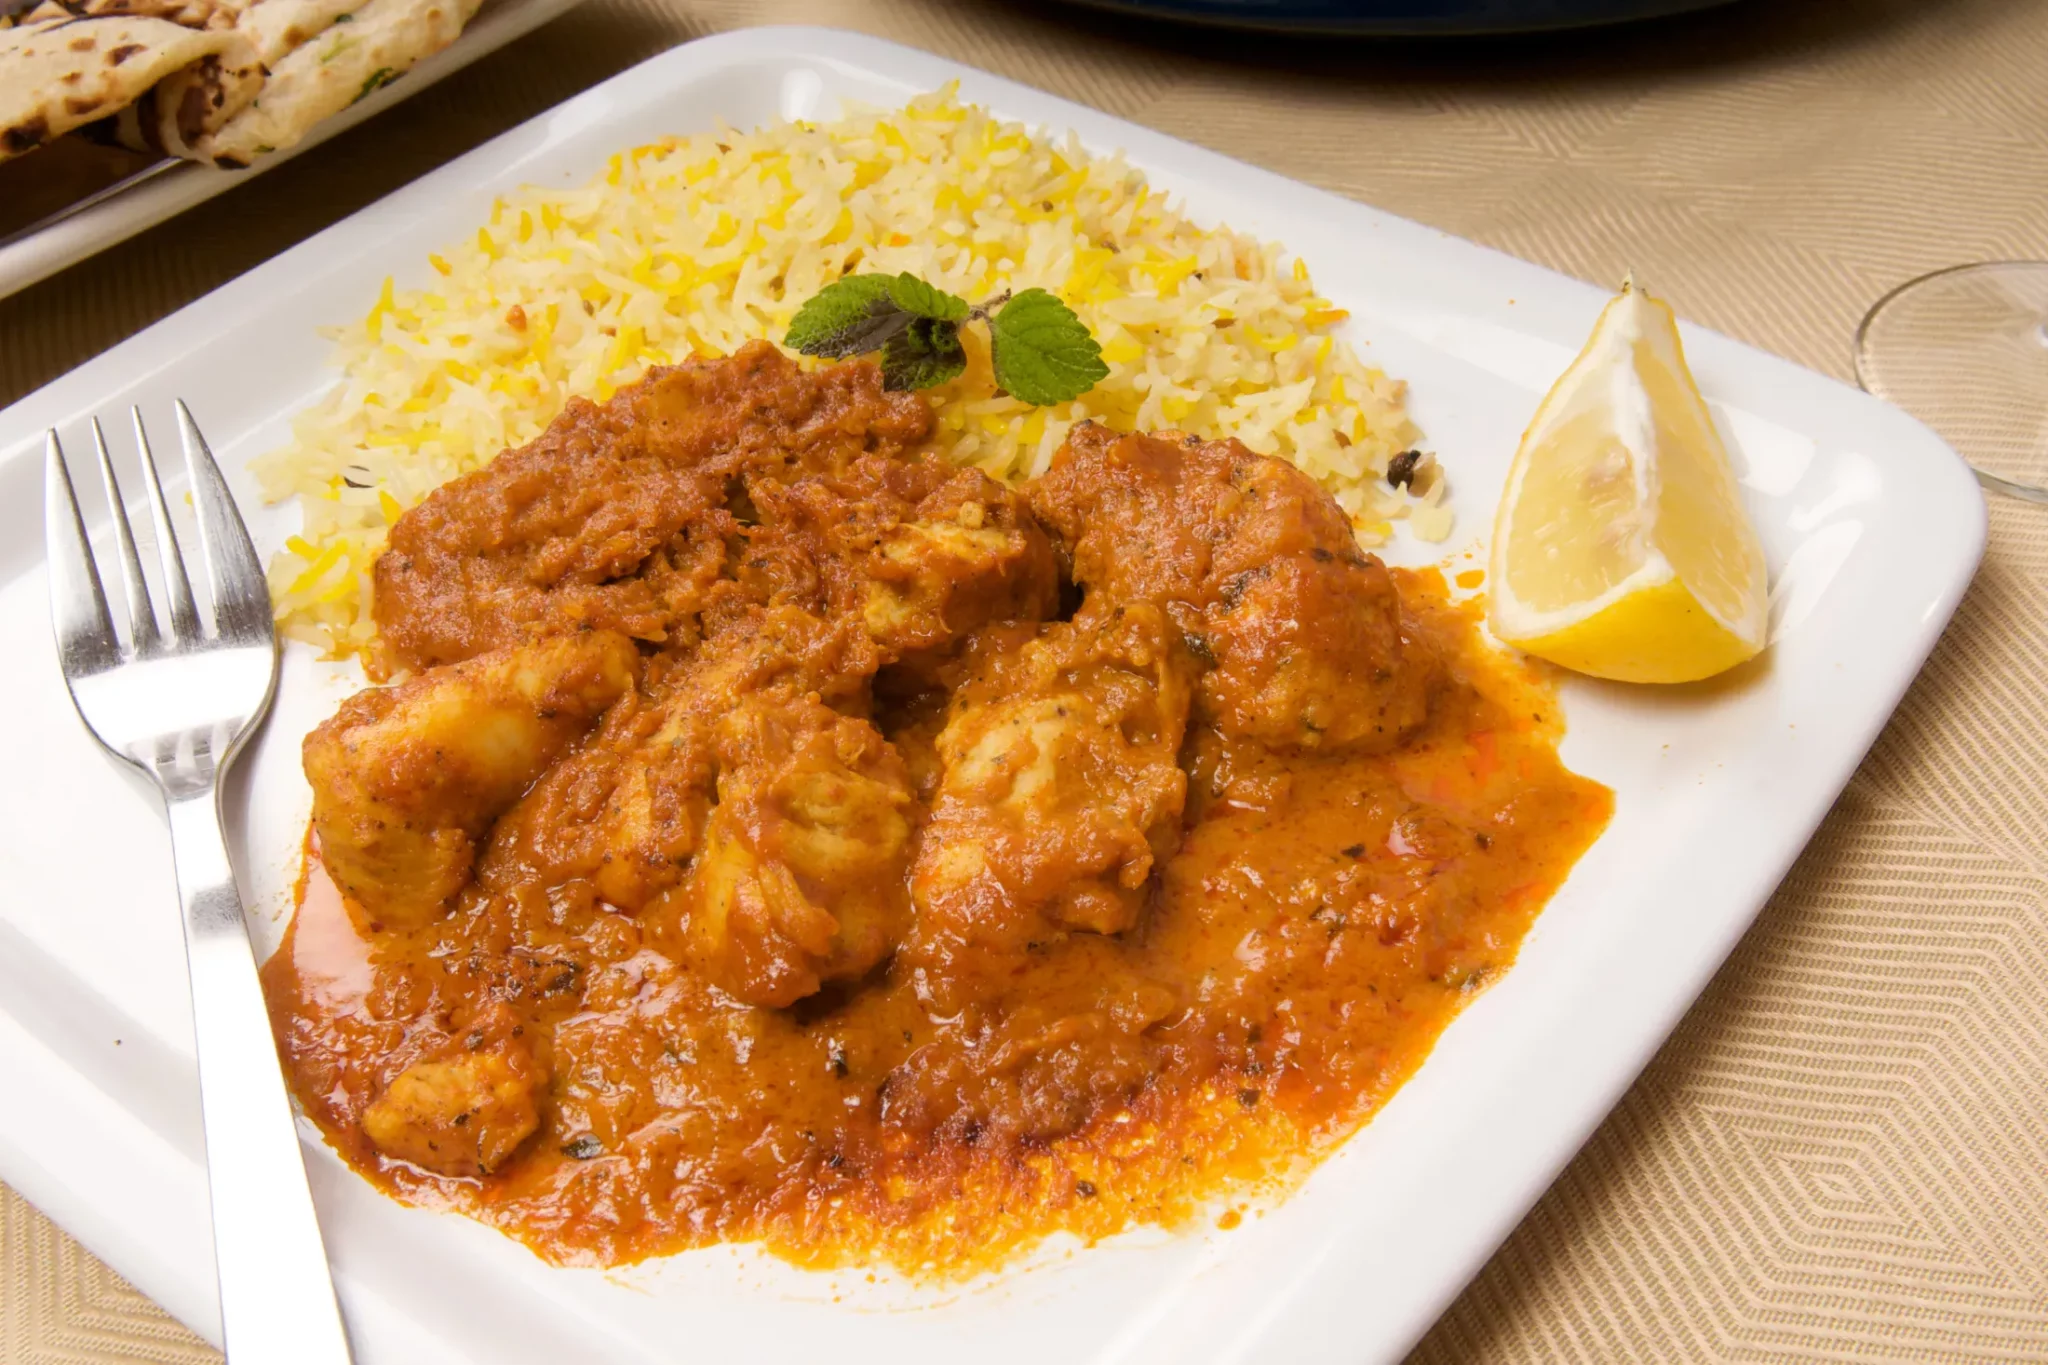 Spicy chicken curry served alongside fragrant saffron rice, garnished with a wedge of lemon, a fusion of flavors often found in Seychelles cuisine.